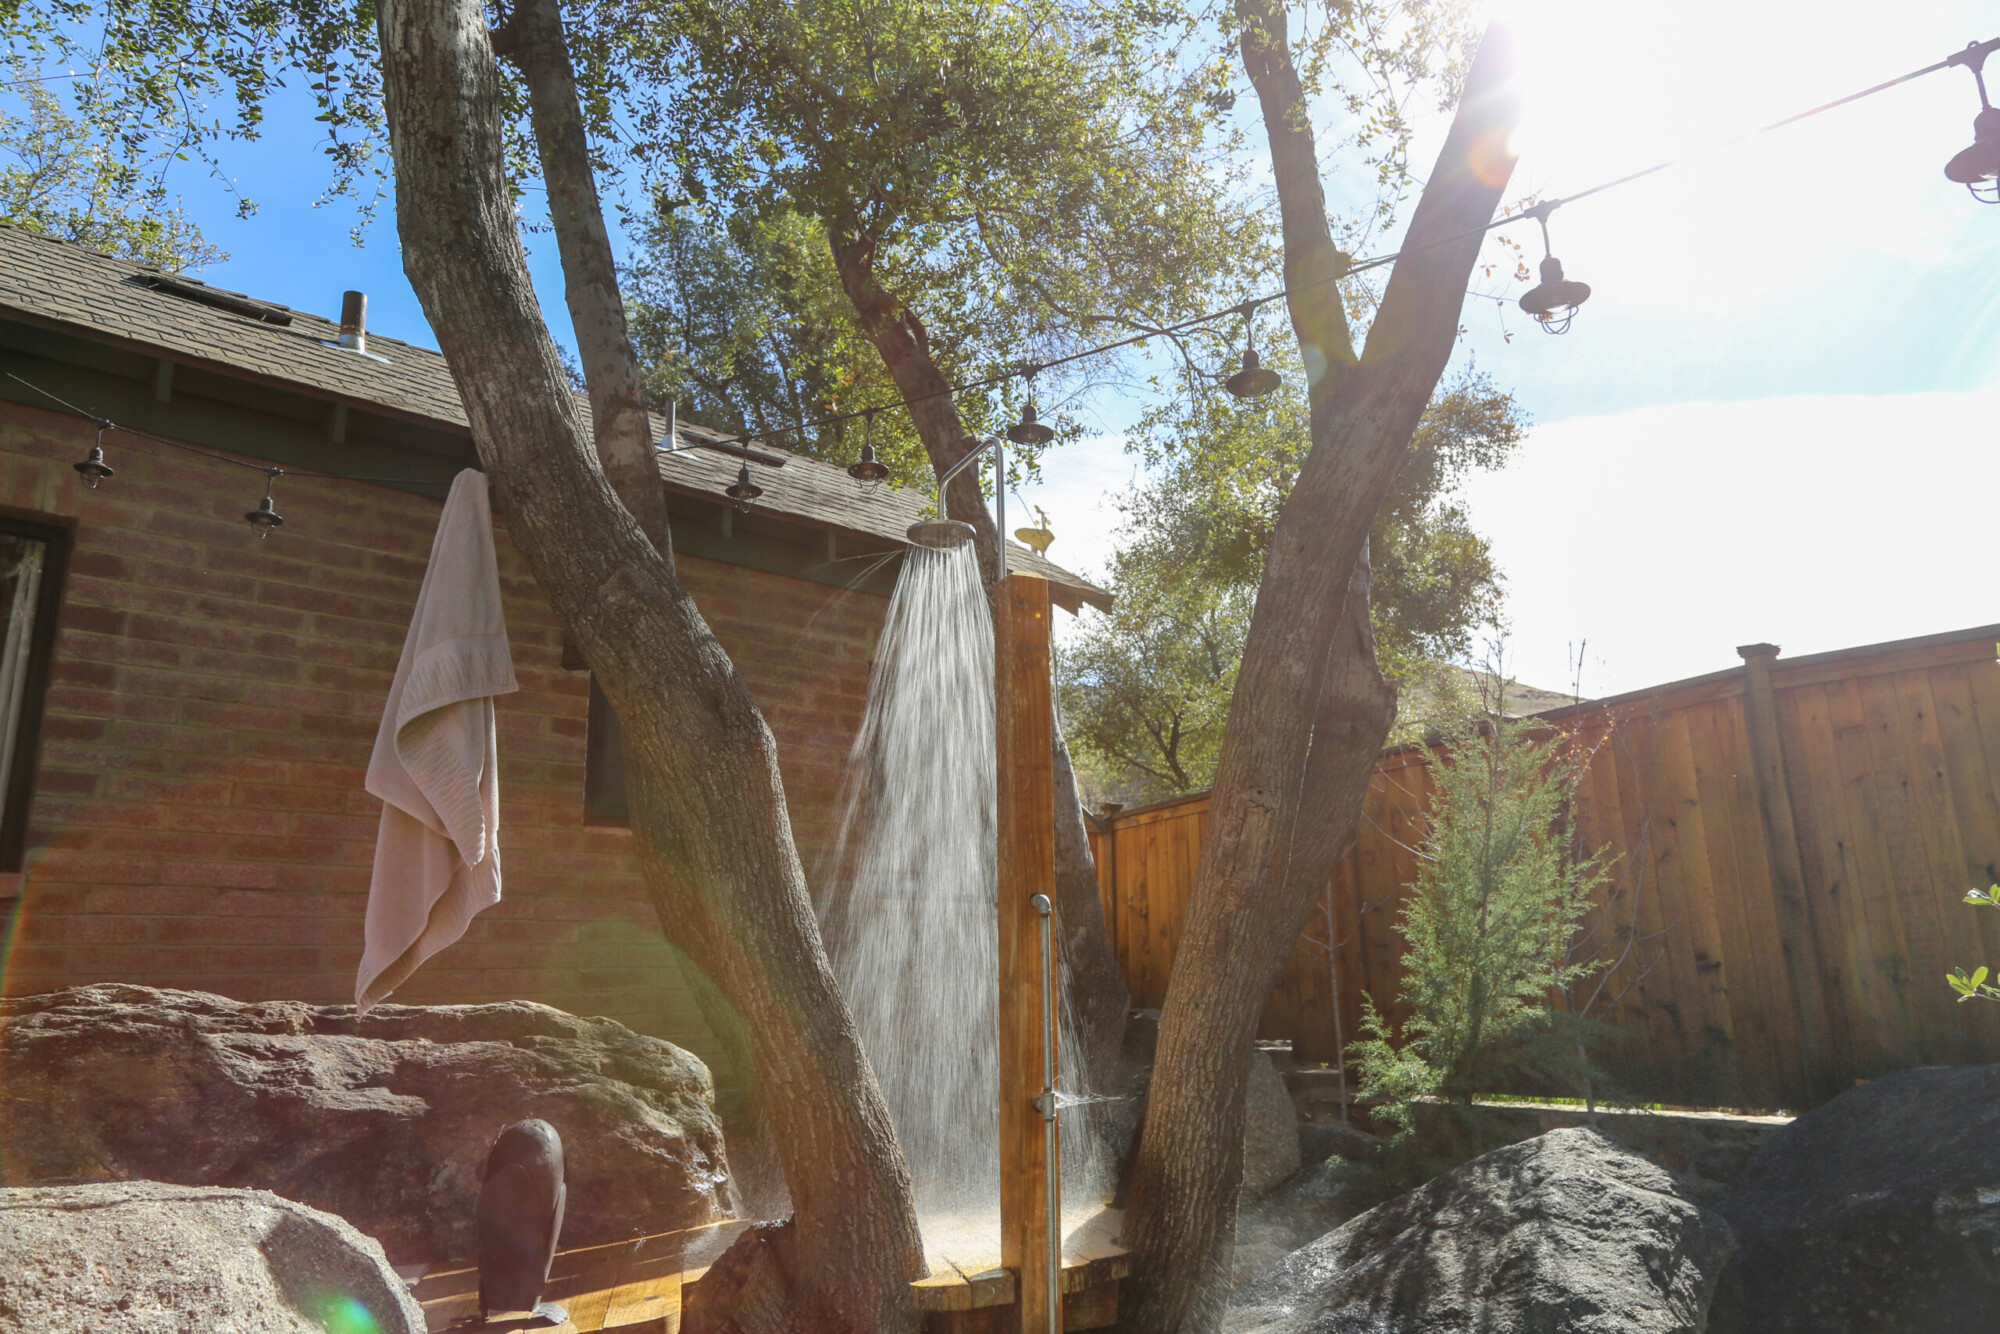 Outdoor Shower set in a cluster of tree trunks at Kern River House's River Willow Cabin in Kernville, California.